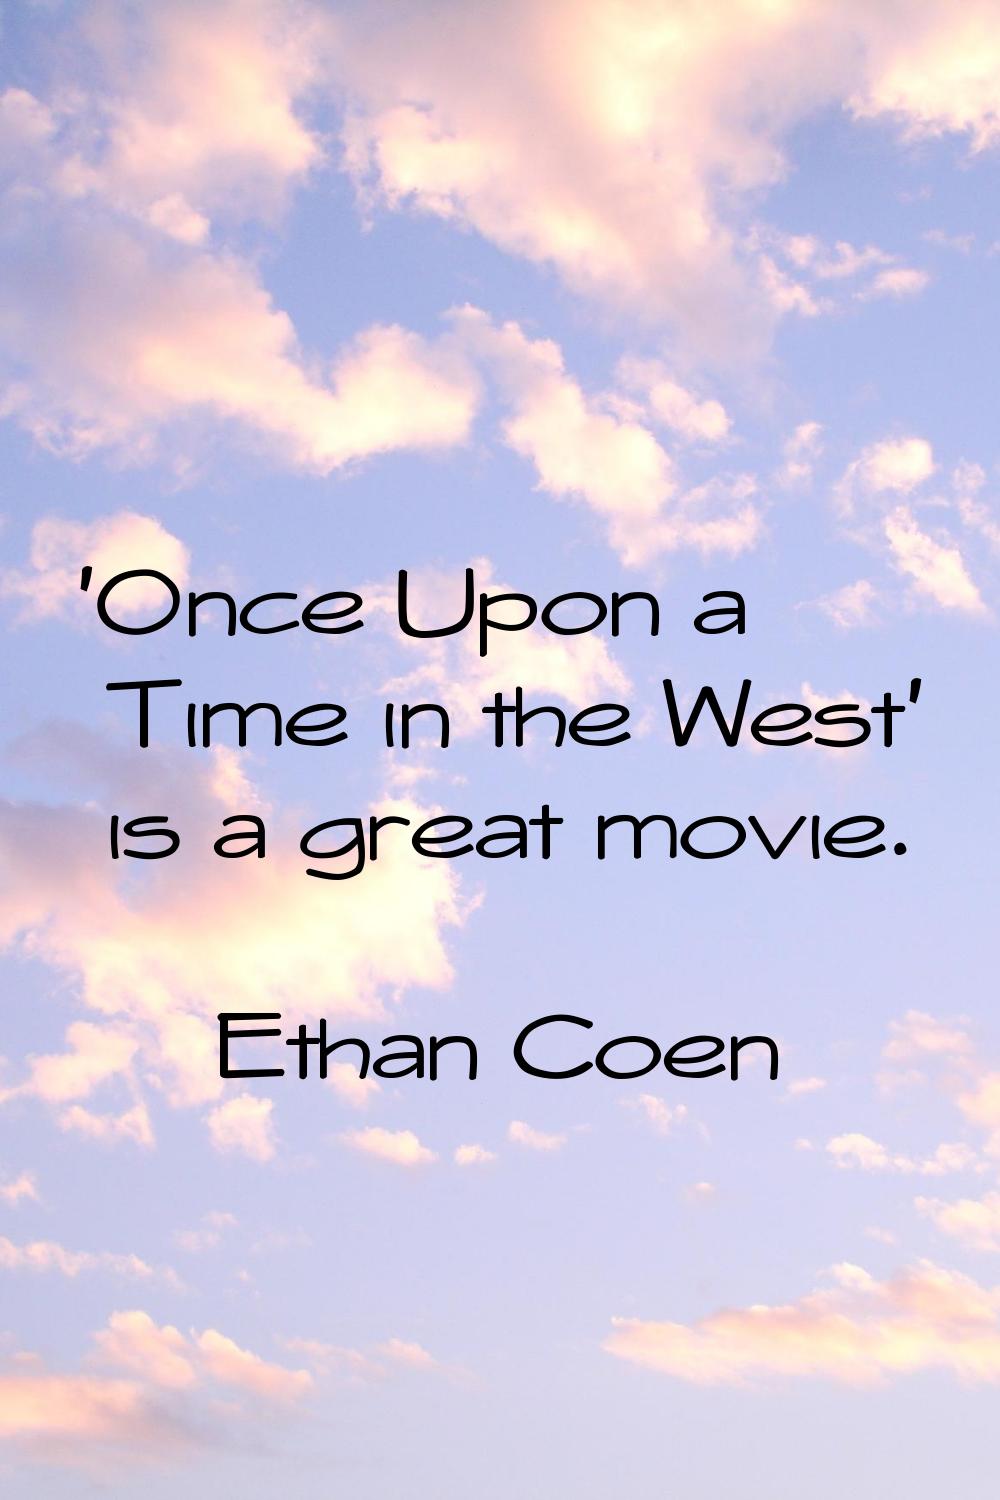 'Once Upon a Time in the West' is a great movie.